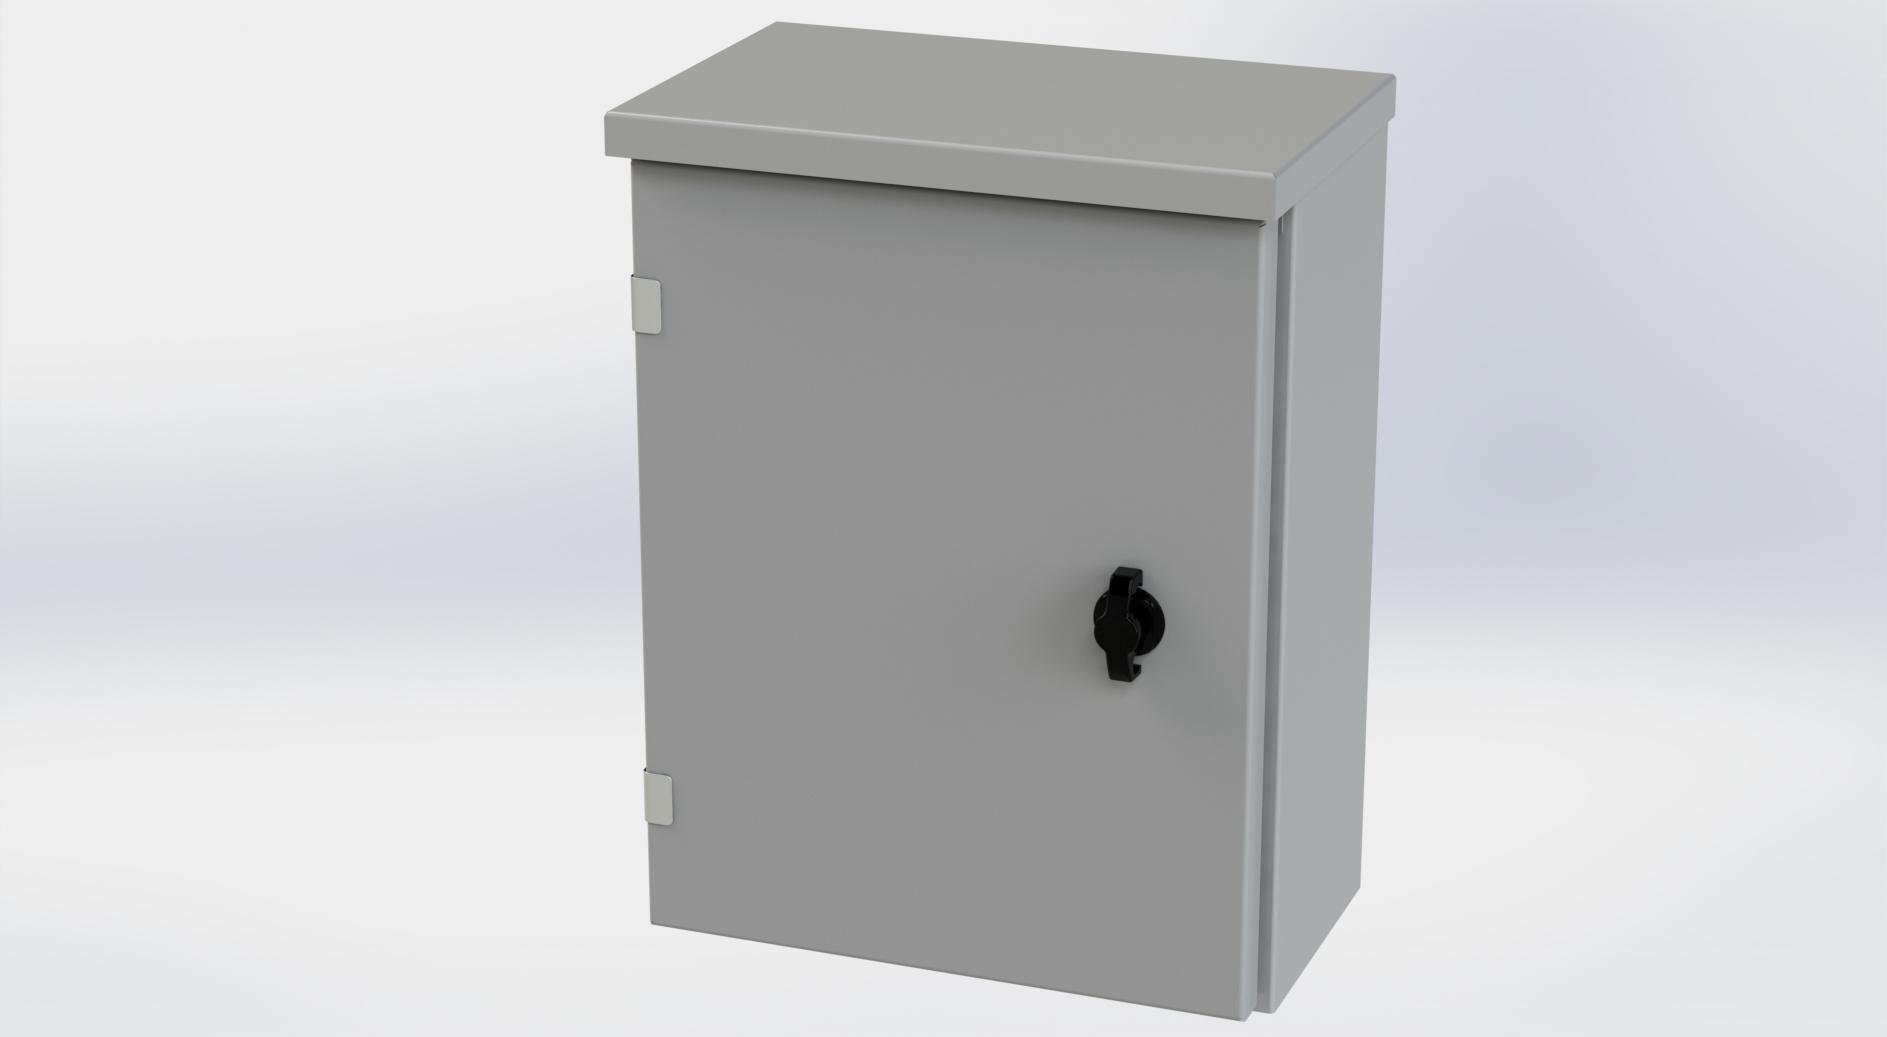 Saginaw Control SCE-16R1206LP Type-3R Hinged Cover Enclosure, Height:16.00", Width:12.00", Depth:6.00", ANSI-61 gray powder coating inside and out. Optional sub-panels are powder coated white.